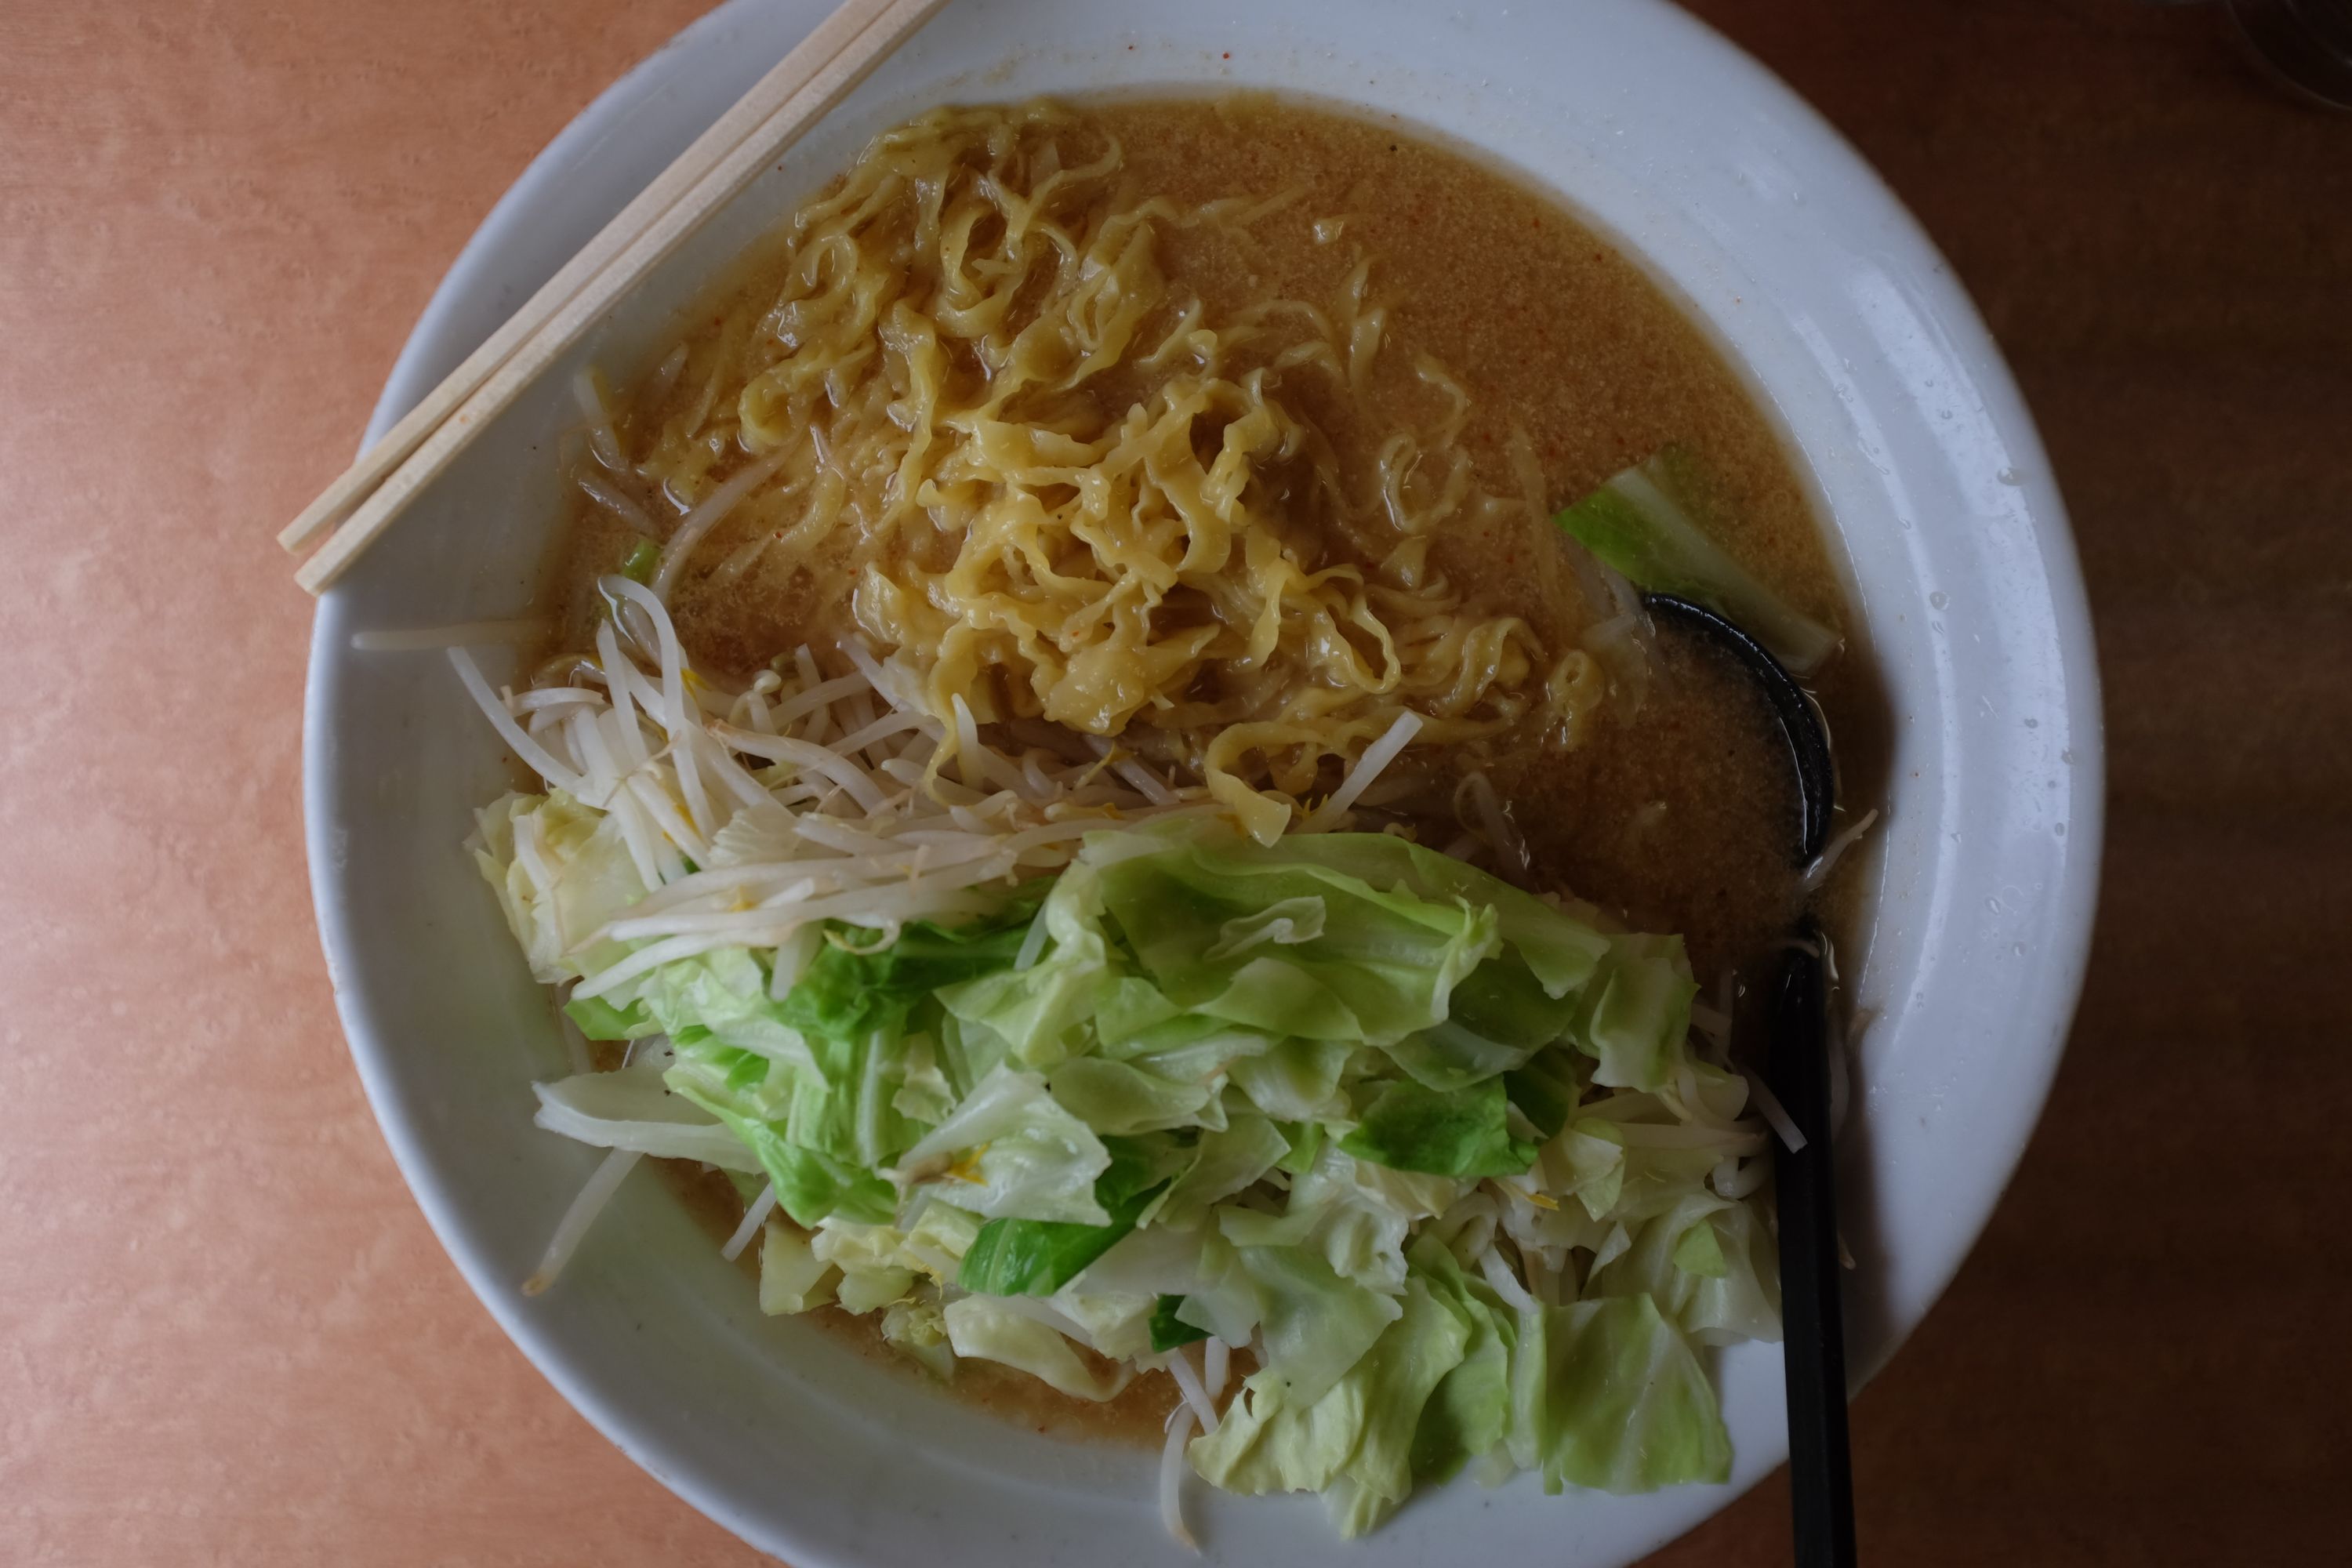 An enormous bowl of miso ramen makes a pair of chopsticks look like a child’s toy.